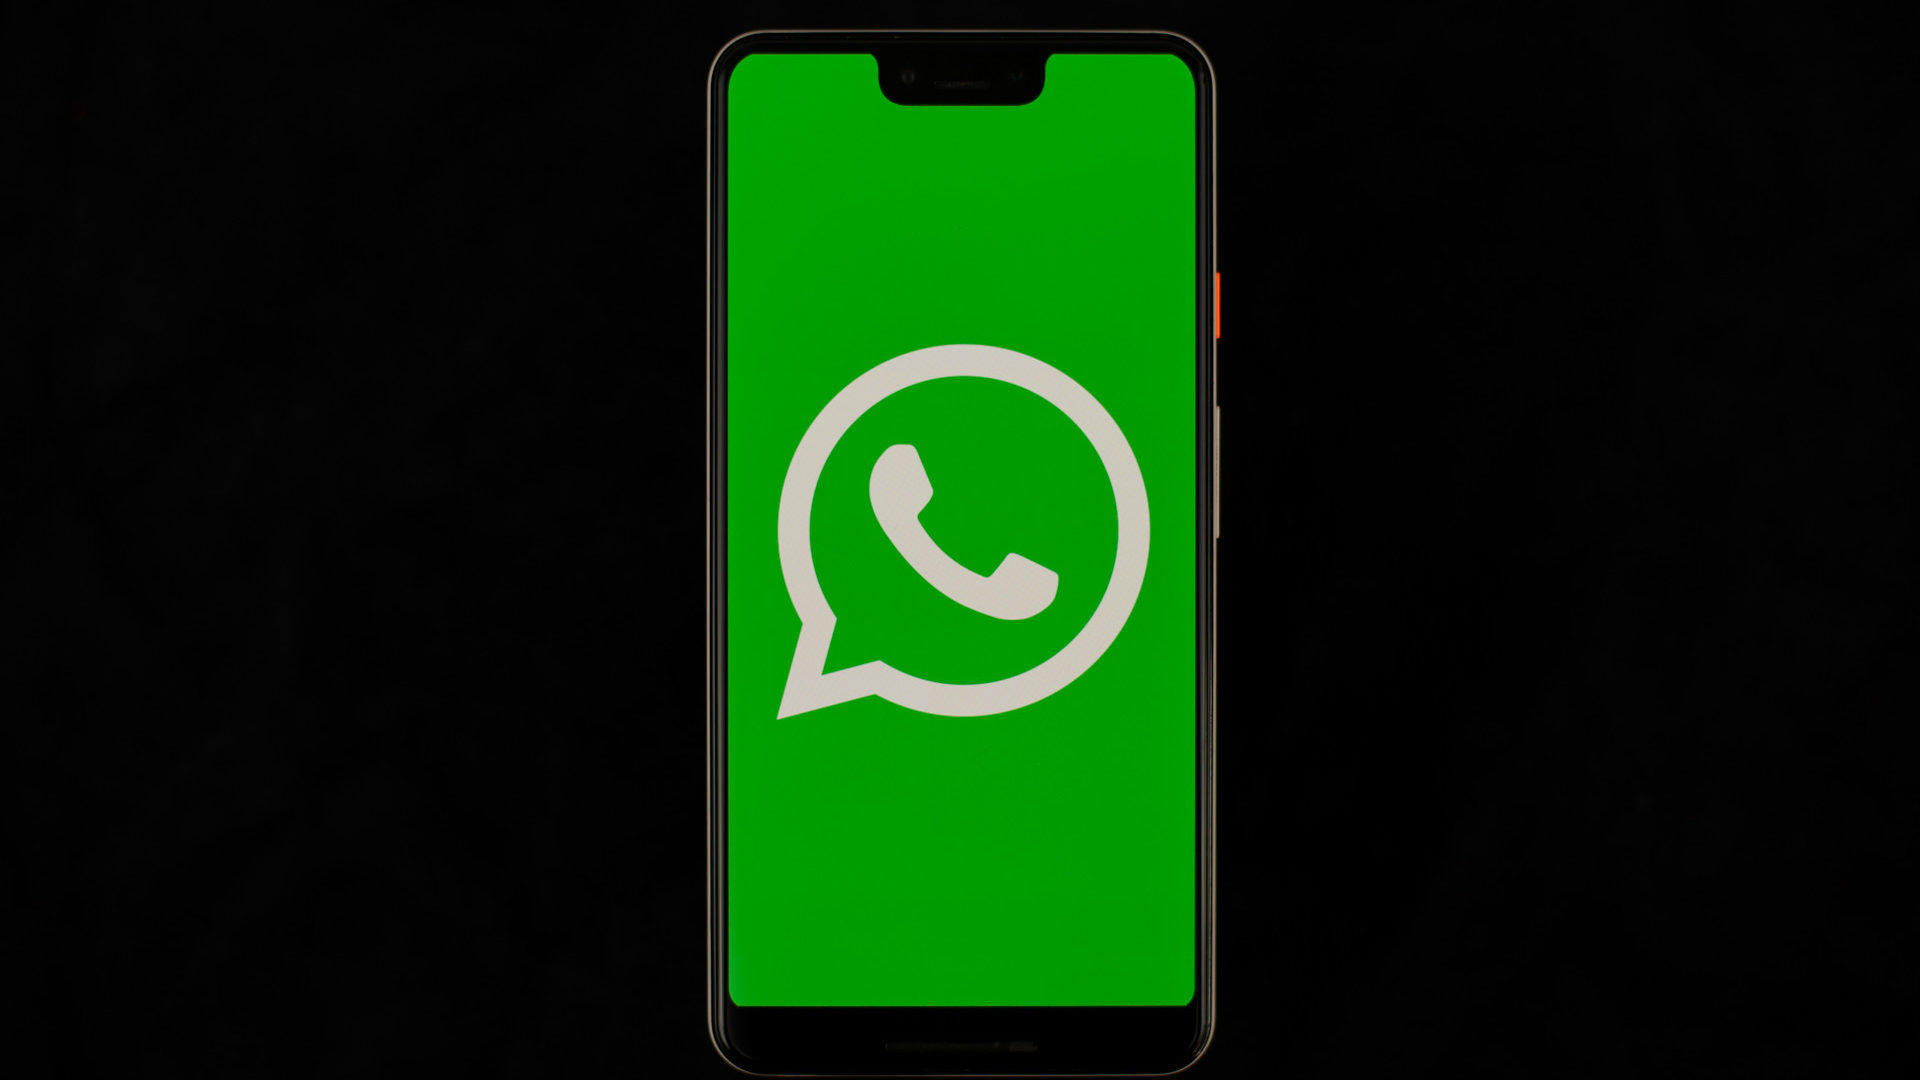 WhatsApp by Facebook stock photo 1